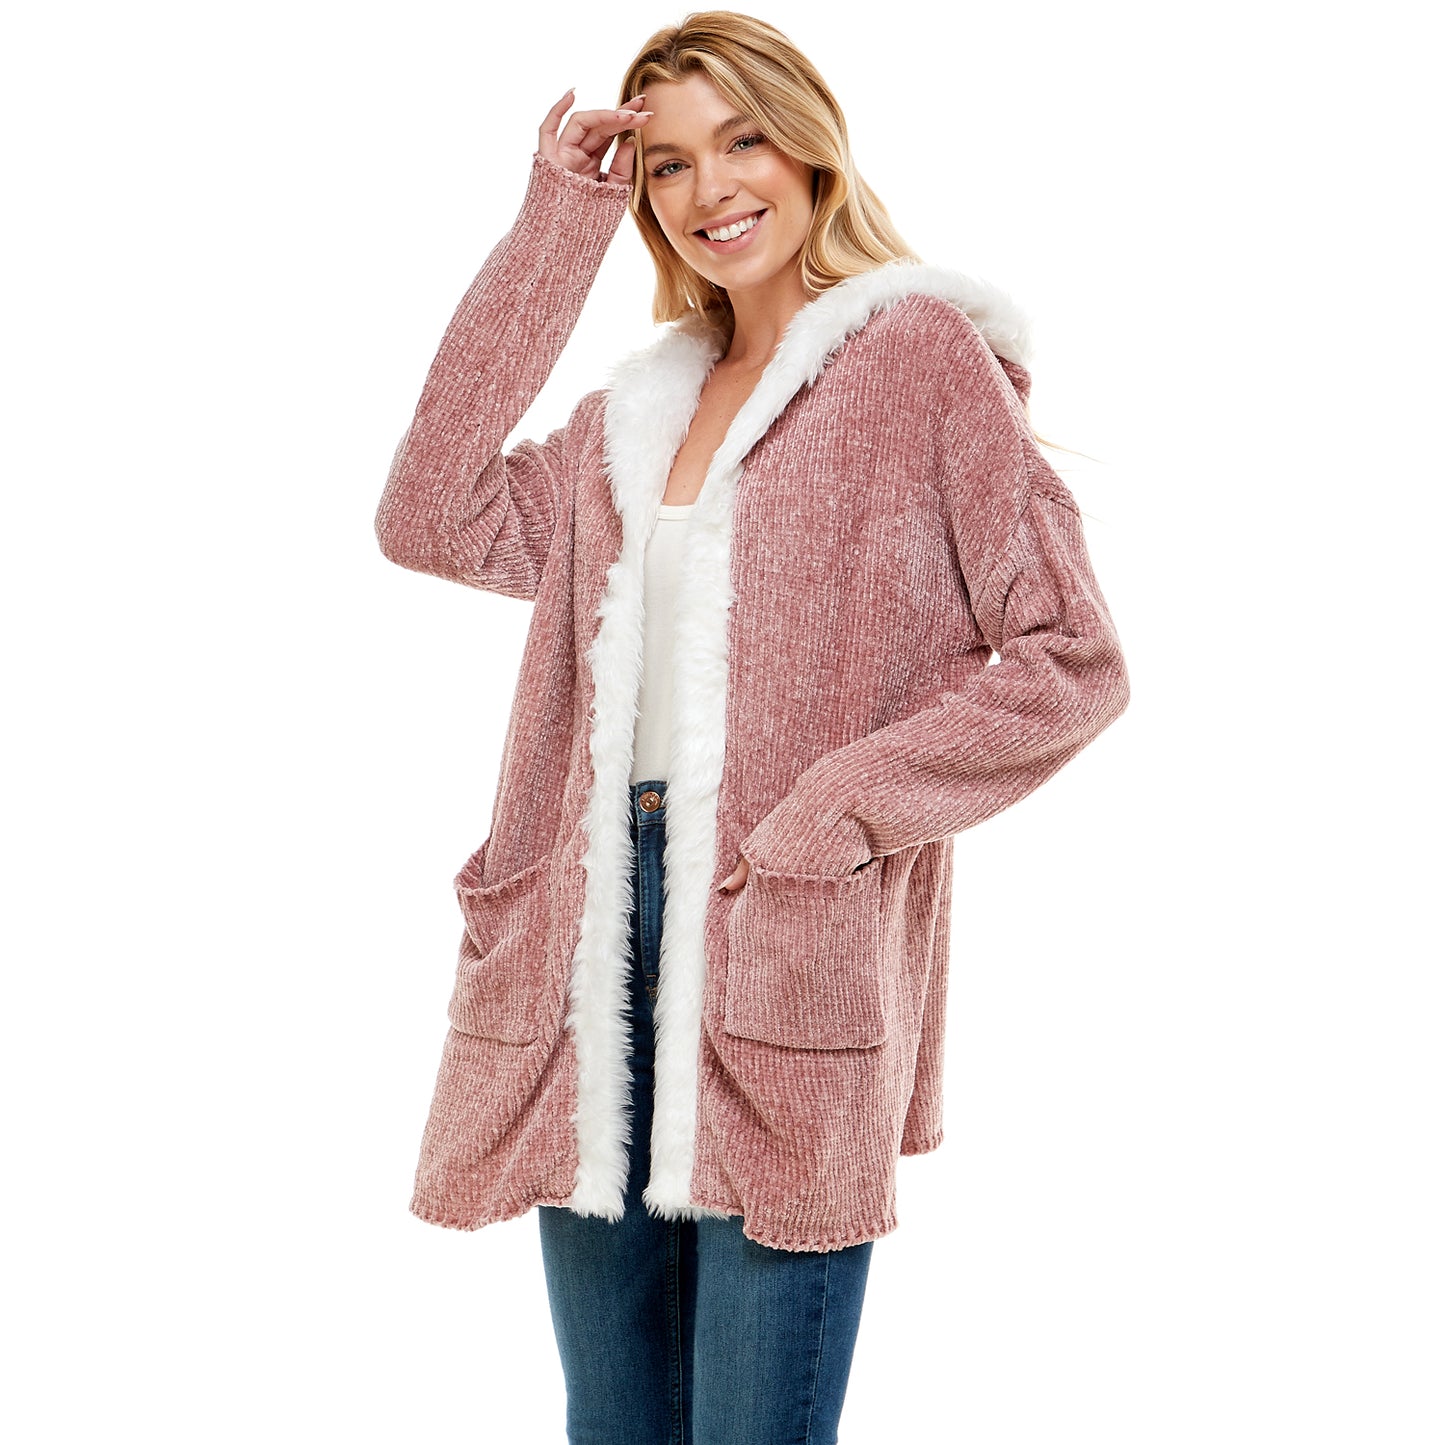 Cardigan Sweater With Hood And Fur Trim